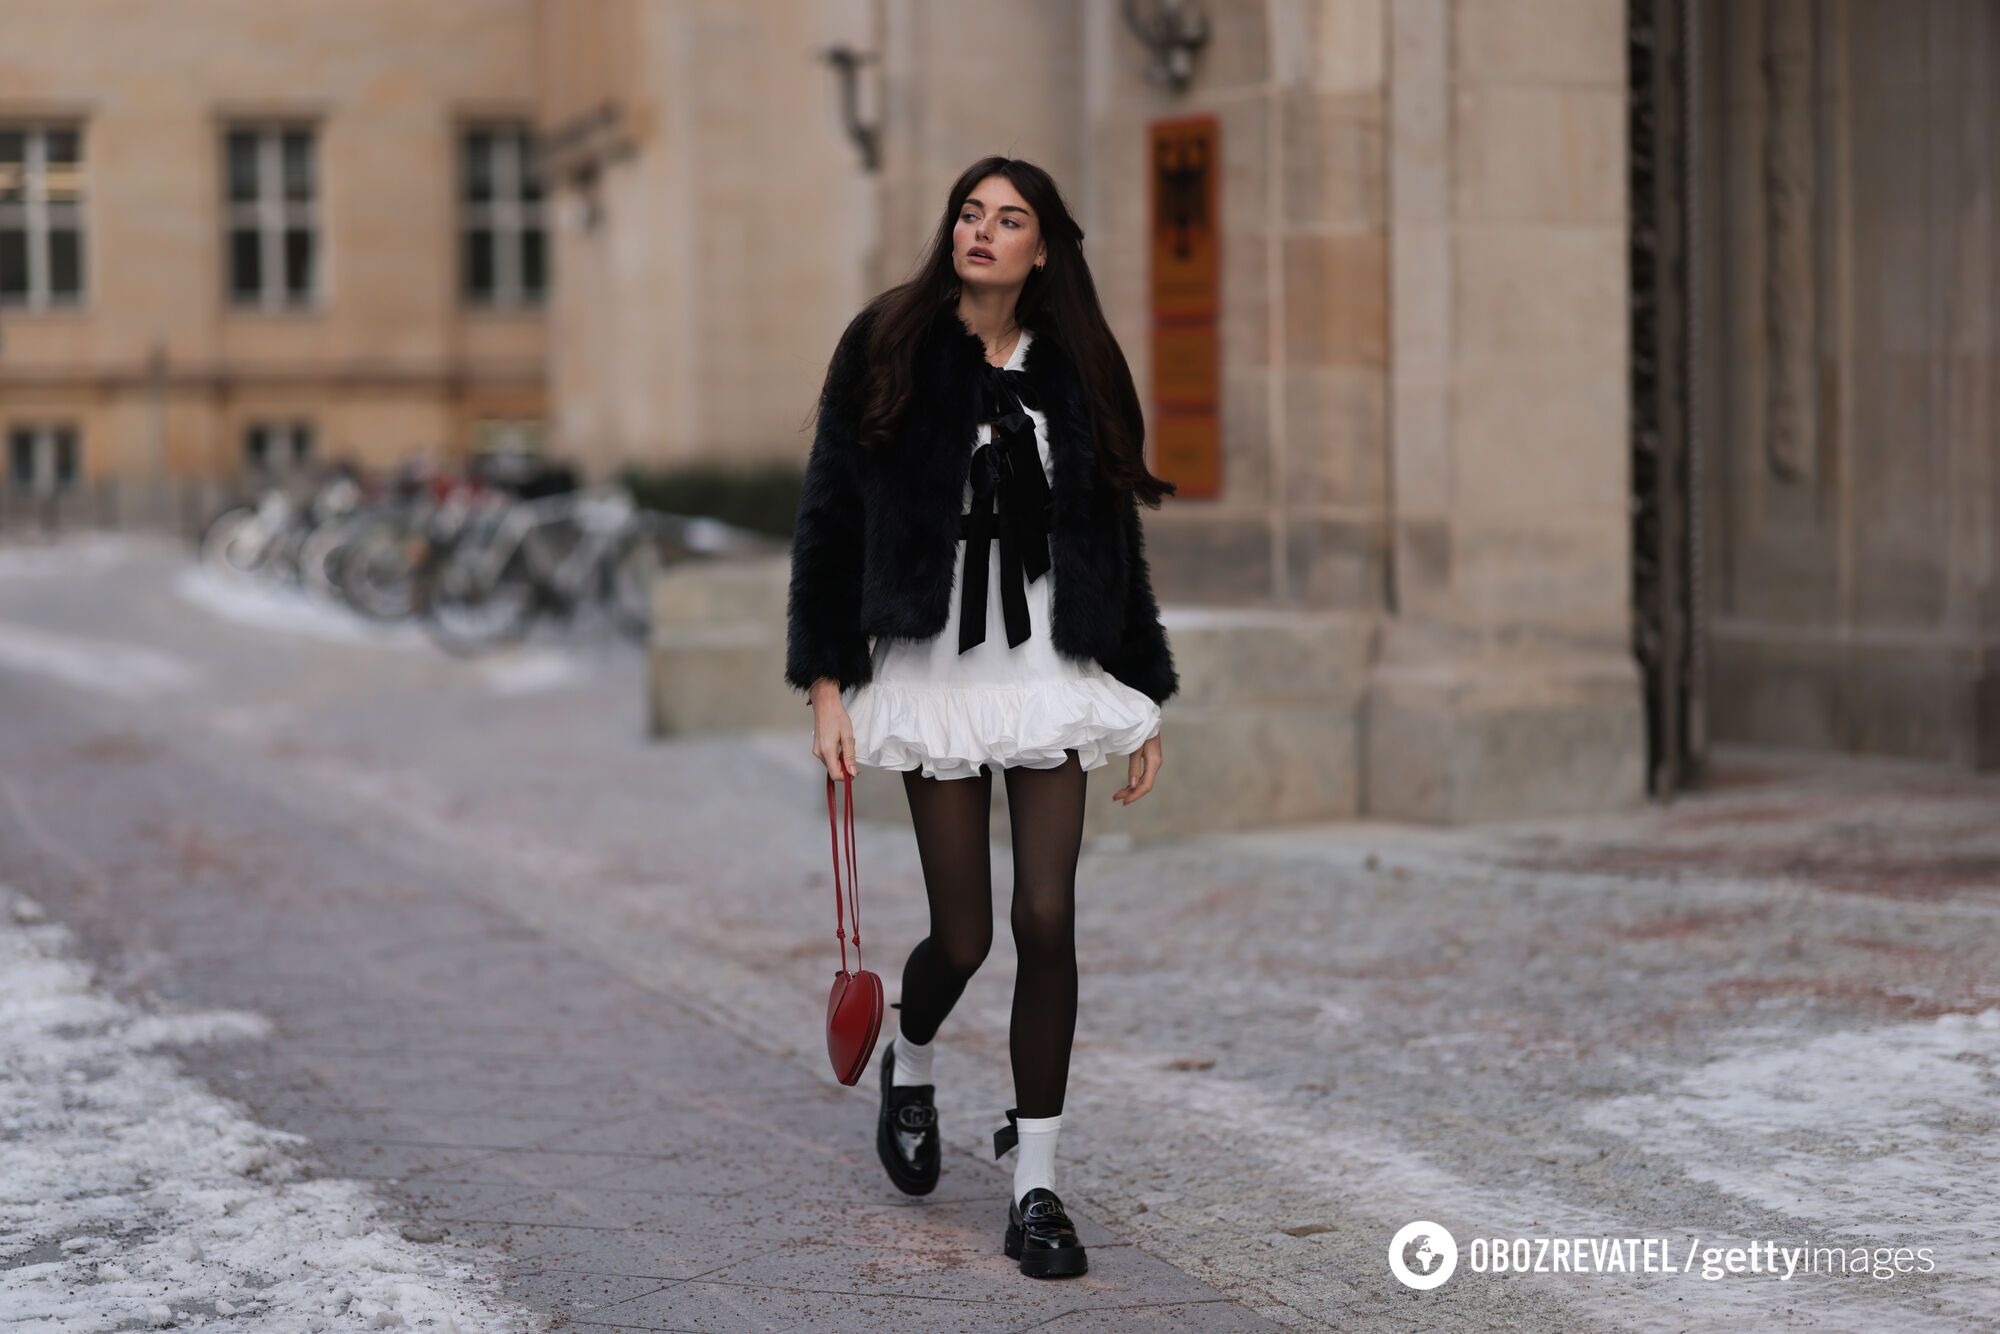 23 Pairs of Eye-Catching Fashion Tights for Winter